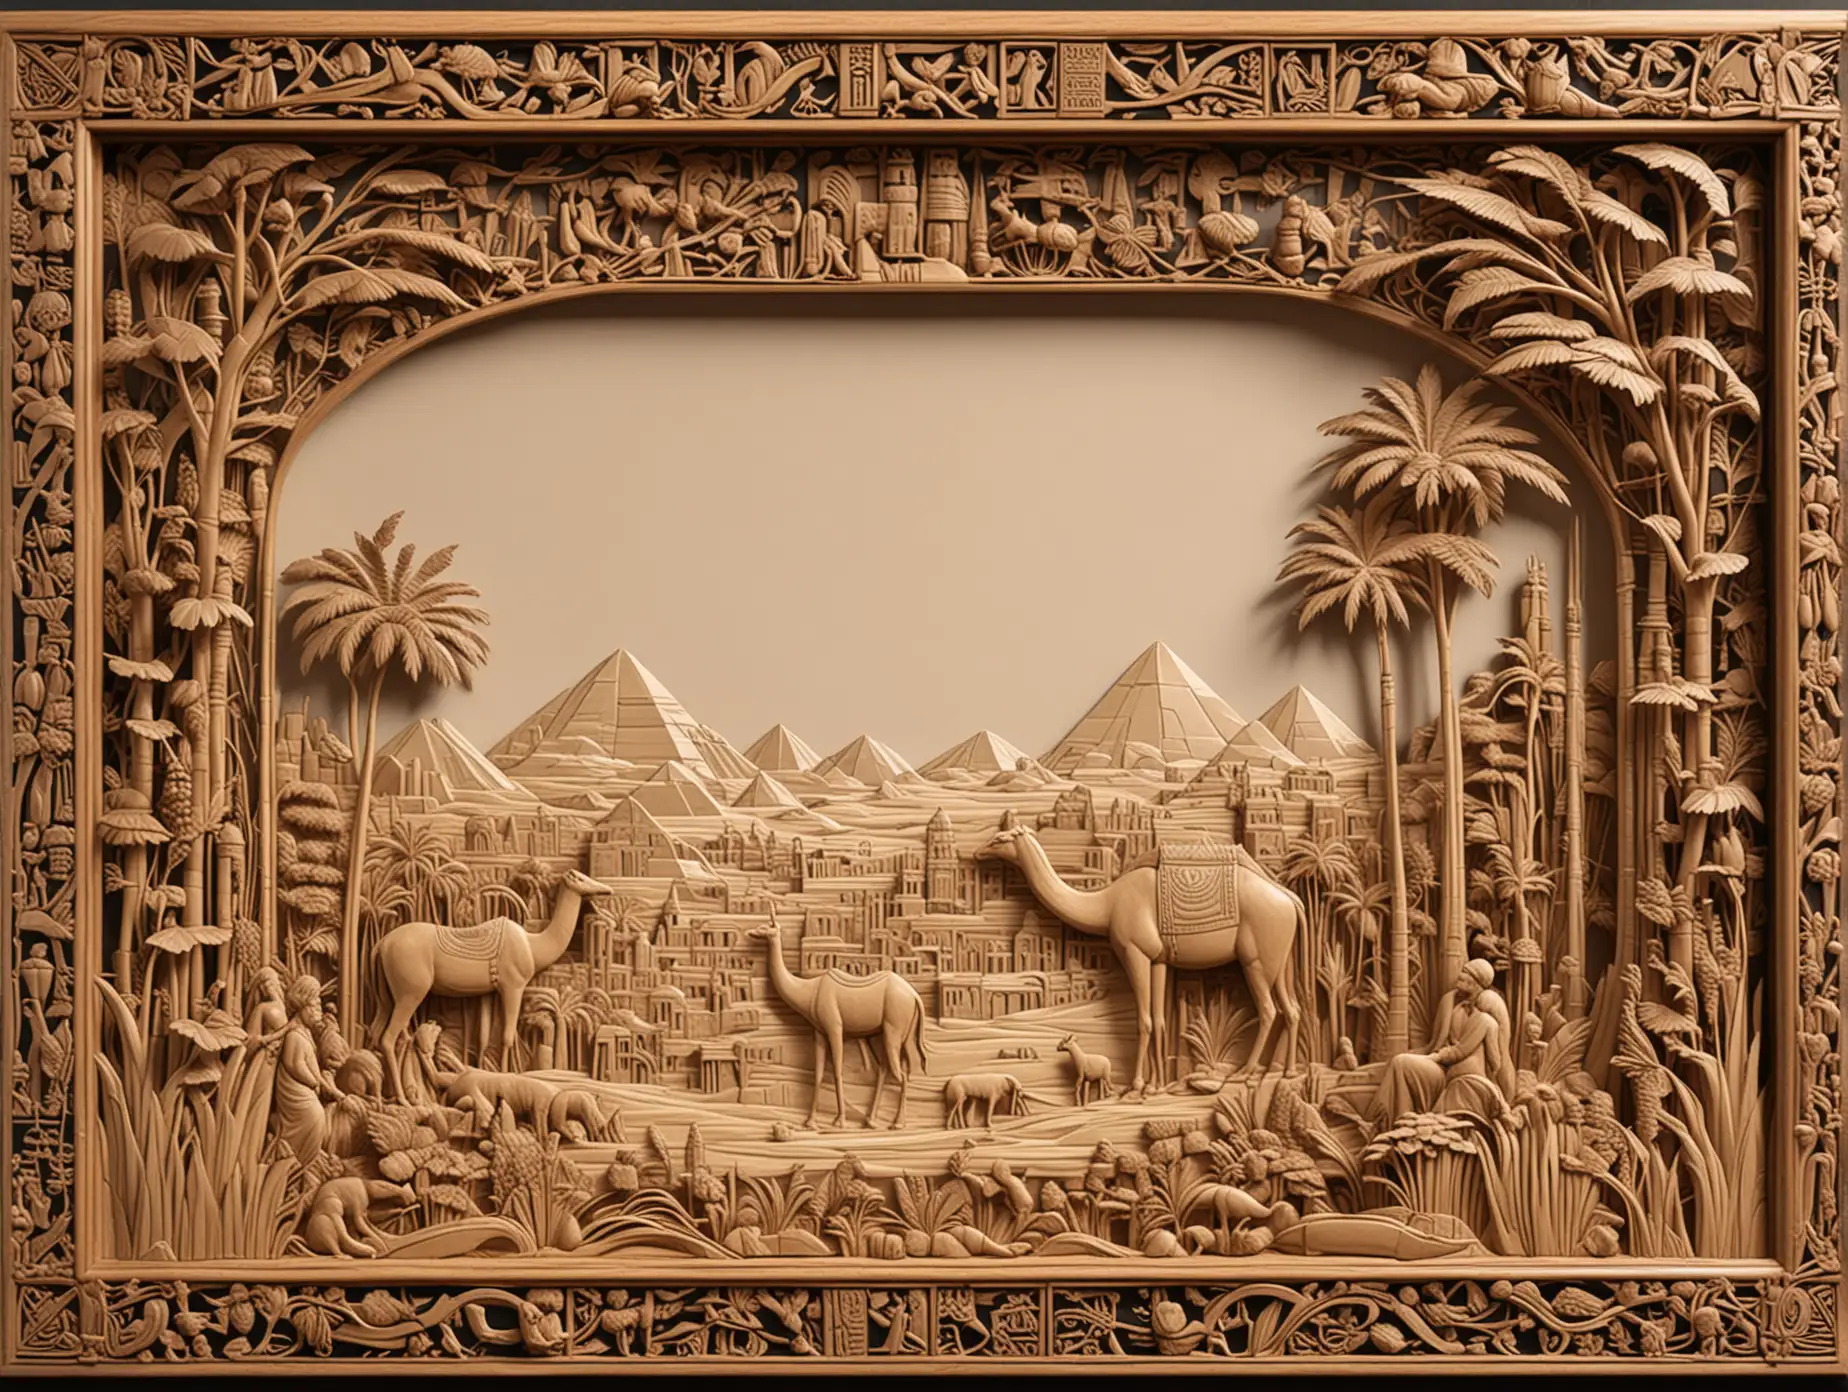 3d and tilable wood lacquer frame surround, featuring a finely carved wooden scene from Egypt in the style of Aubrey beardsley